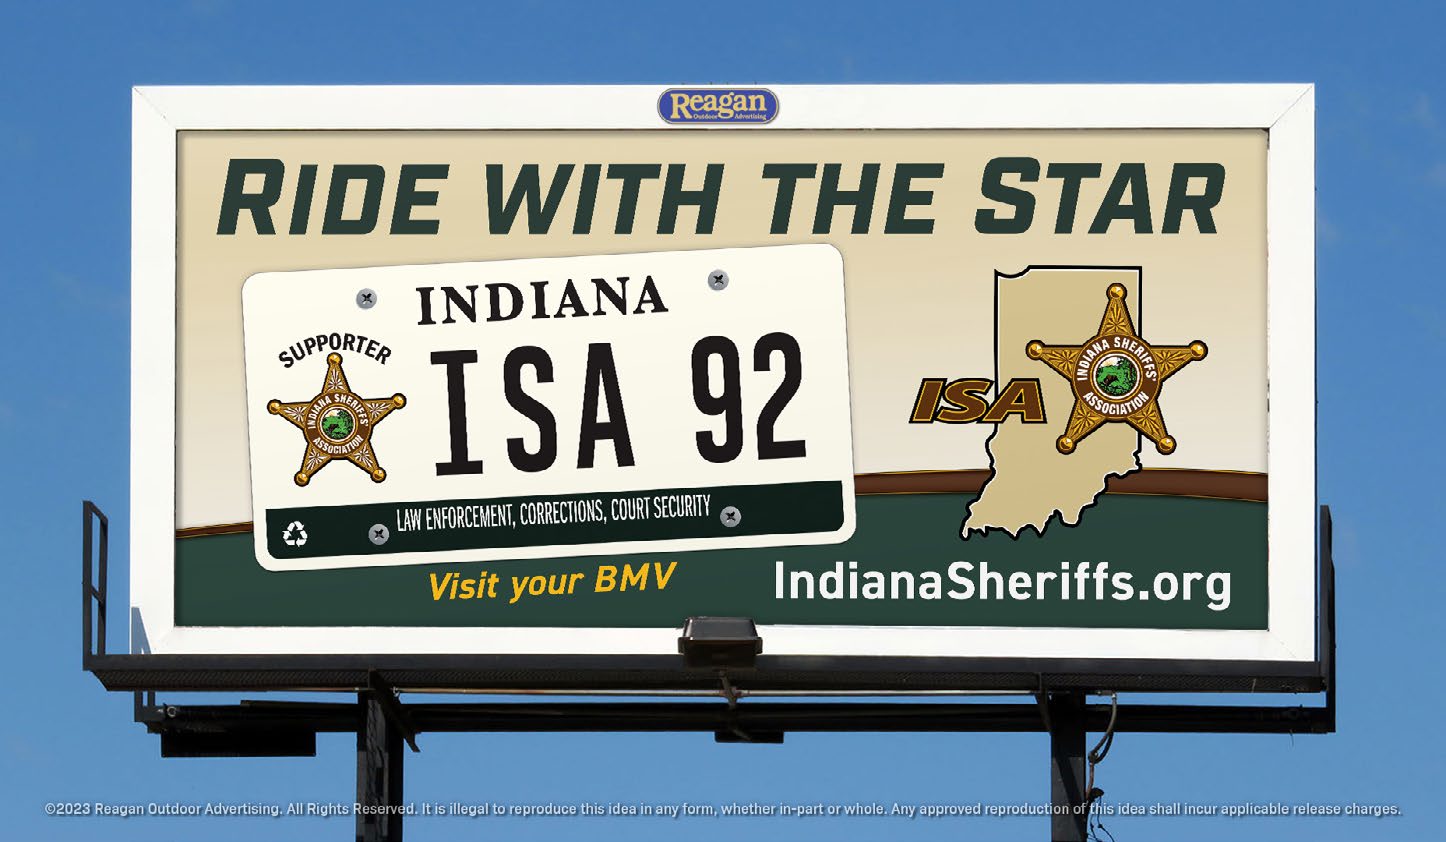 Ride with the star license plate billboard.